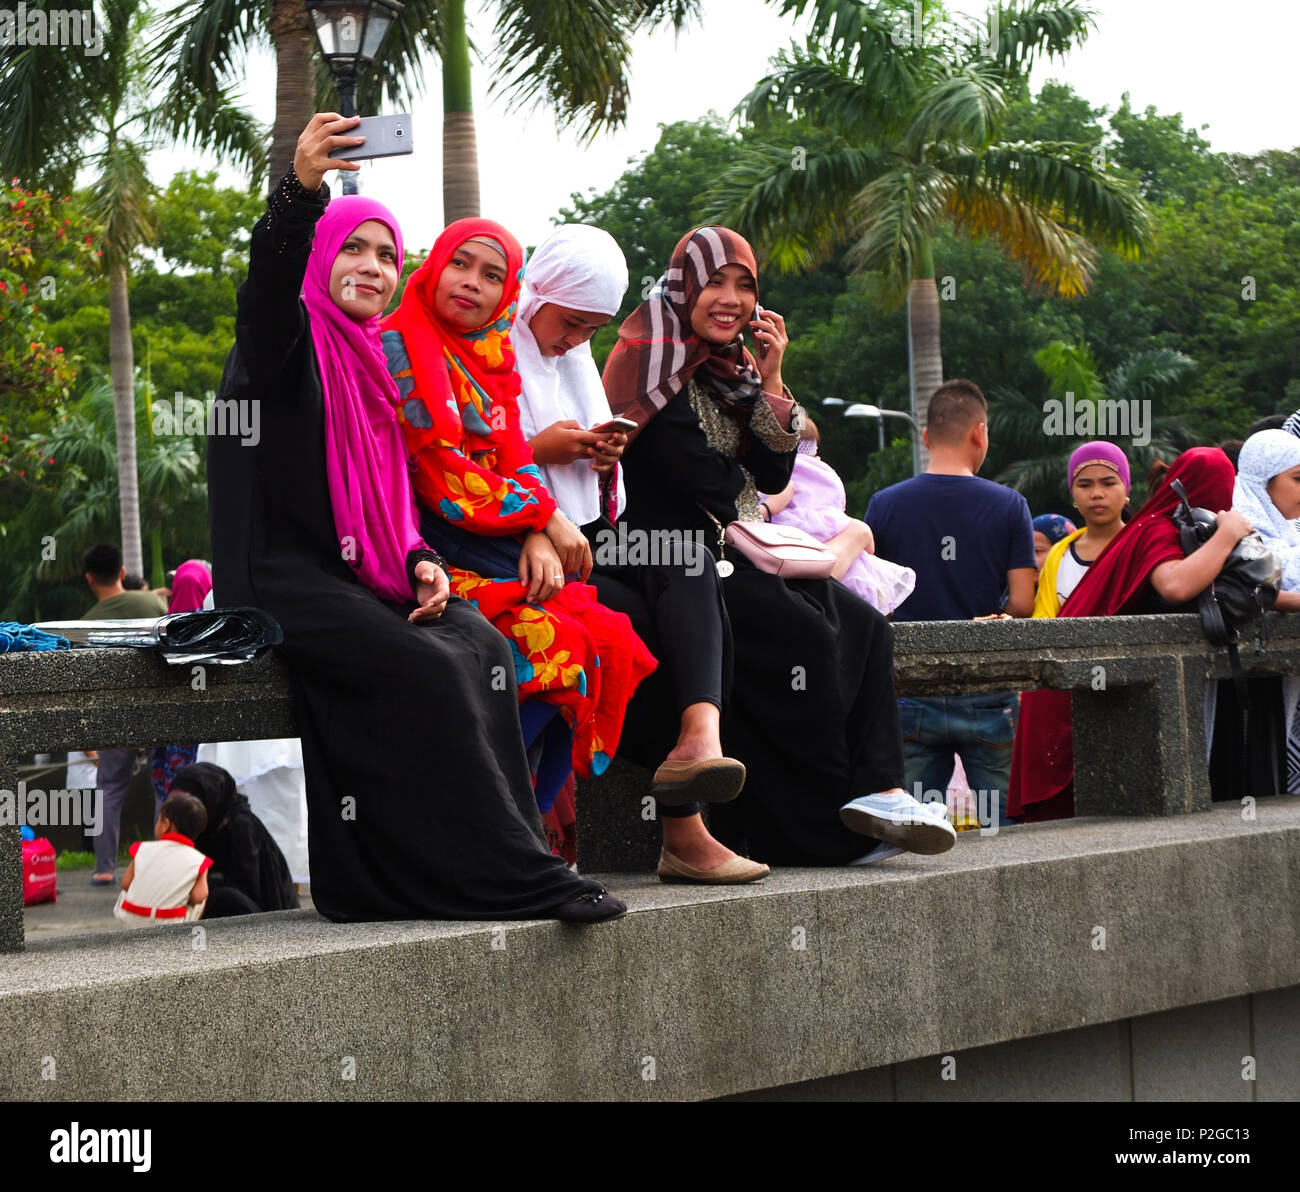 A group of Muslim women taking a selfie. Filipino and foreign Muslims gather at Quirino Grandstand in Manila to celebrate the end of Ramadan. They celebrate it with prayers, food and fun, especially for the family. Eid al-Fitr is an important religious holiday celebrated by Muslims worldwide that marks the end of Ramadan, the Islamic holy month of fasting. Stock Photo